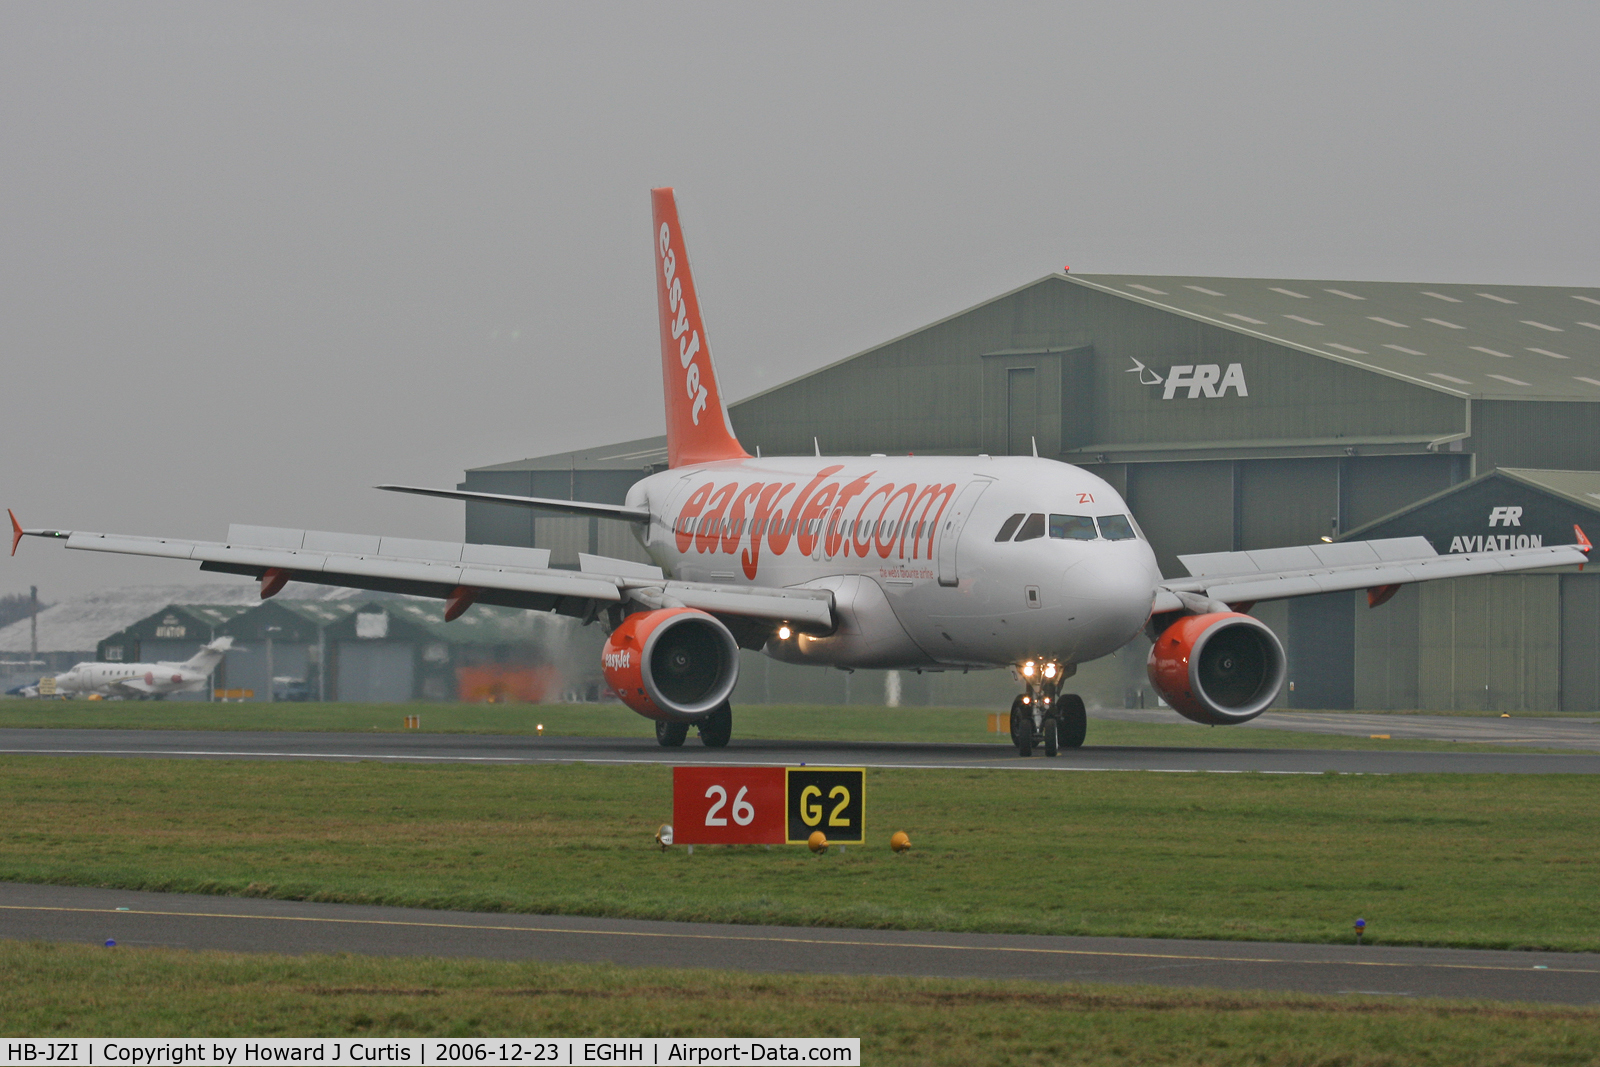 HB-JZI, 2004 Airbus A319-111 C/N 2245, easyJet Switzerland, slowing down with everything dangling.